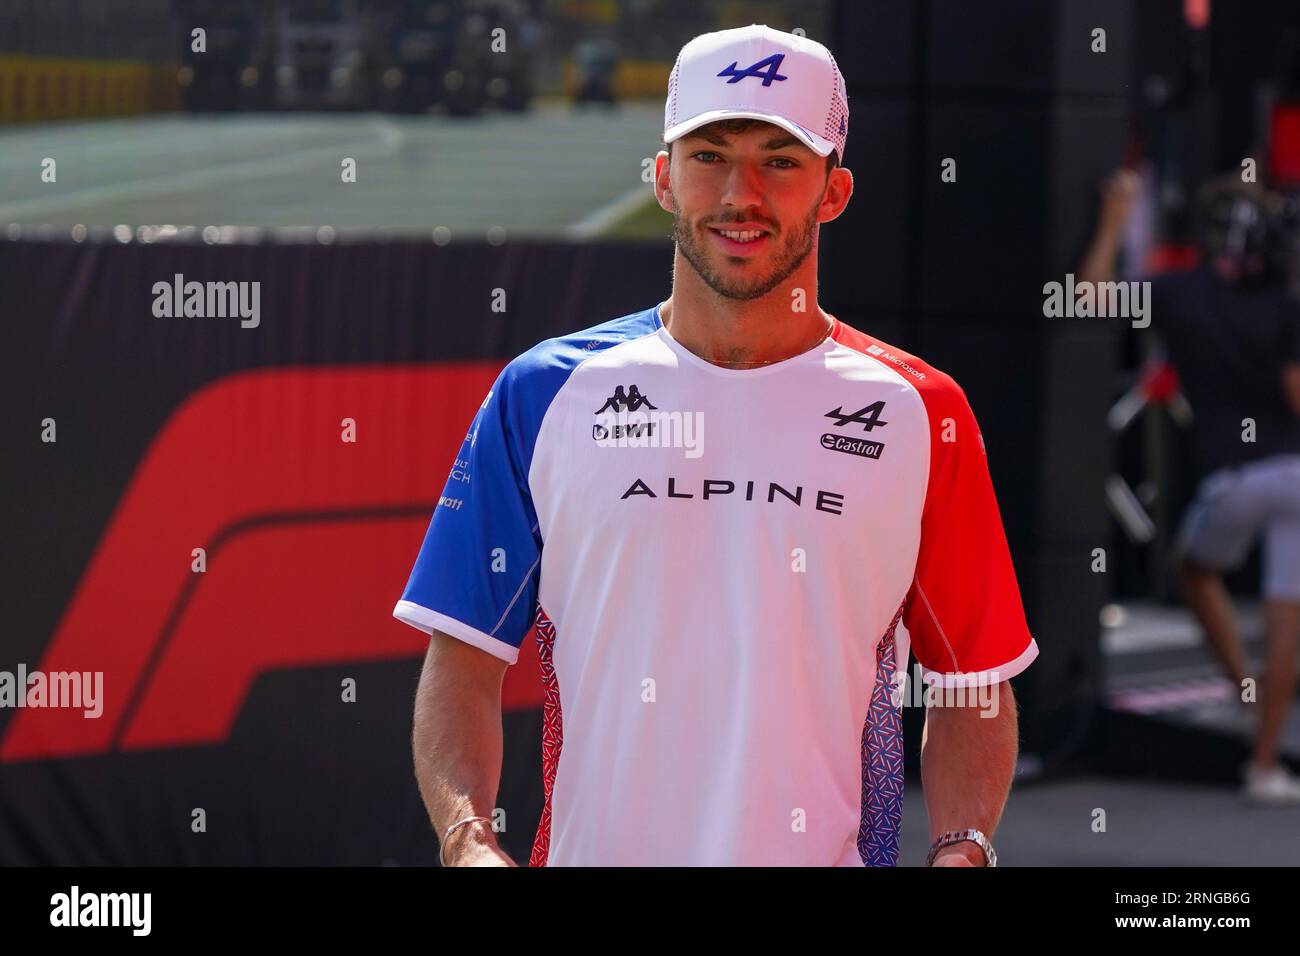 Bwt alpine f1 team hi-res stock photography and images - Alamy